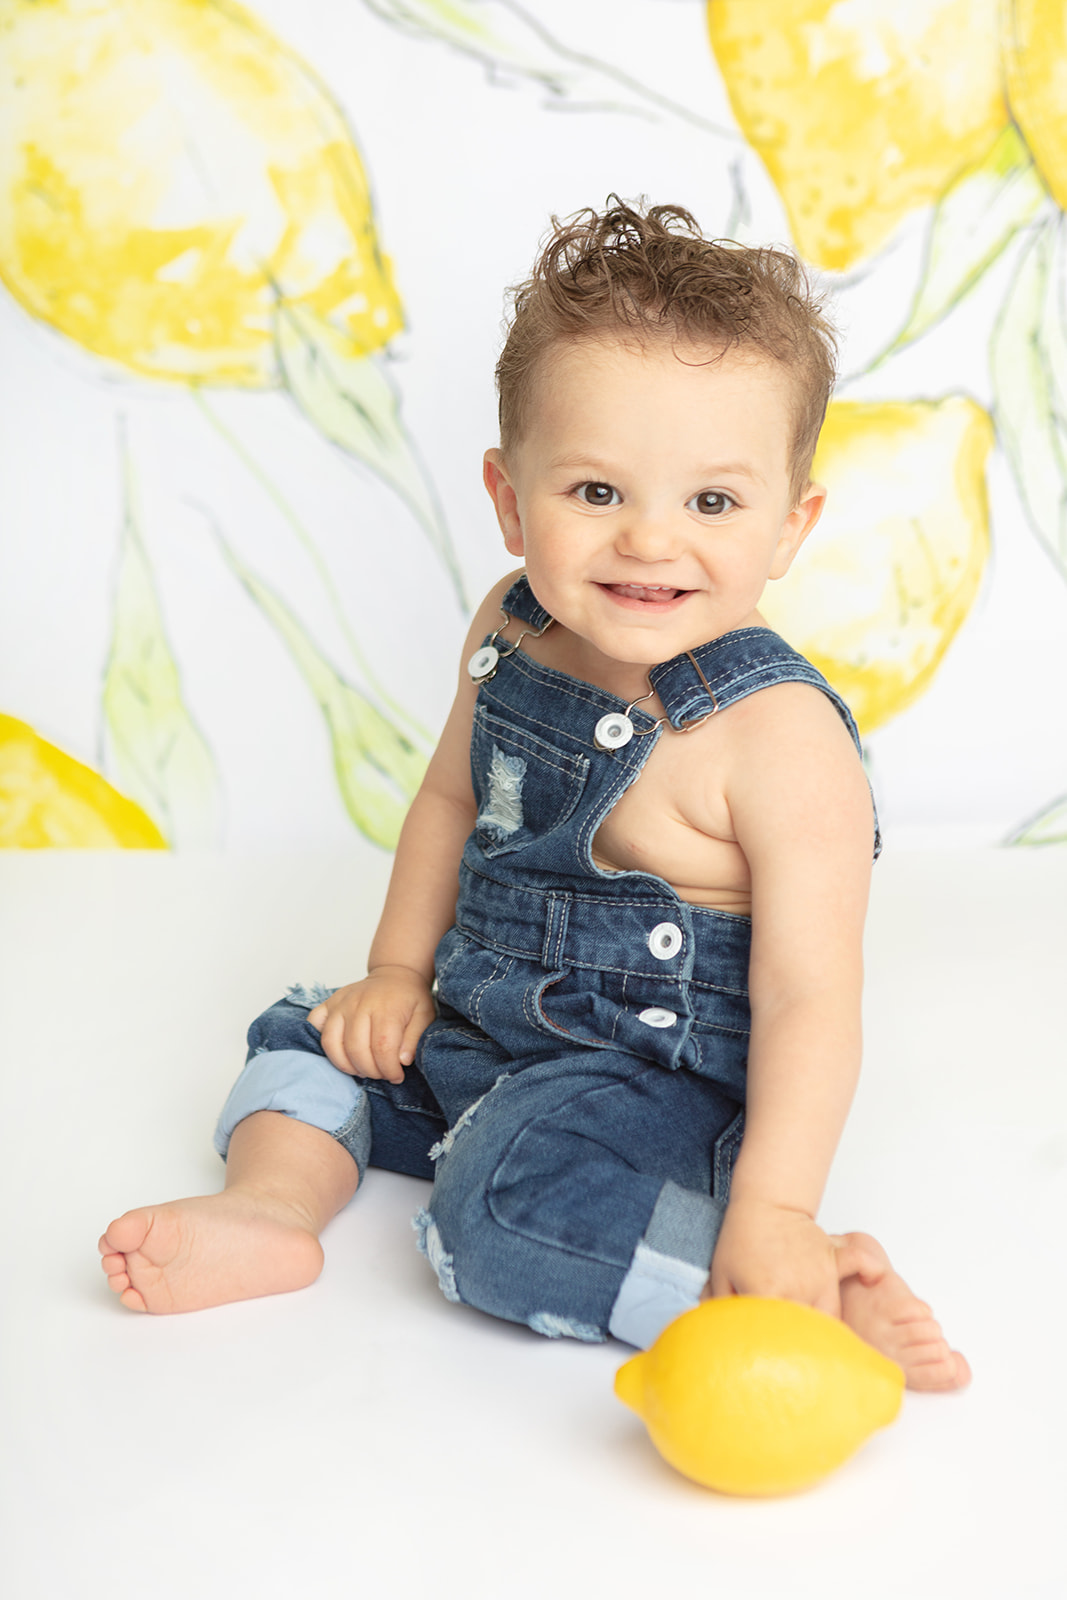 A smiling one year-old little boy in dark denim overalls leans slightly toward the camera. He has a mischievous smile on his face and is barefoot. A lemon prop sits in the foreground and the background is a painted lemon backdrop by Heidi Hope.